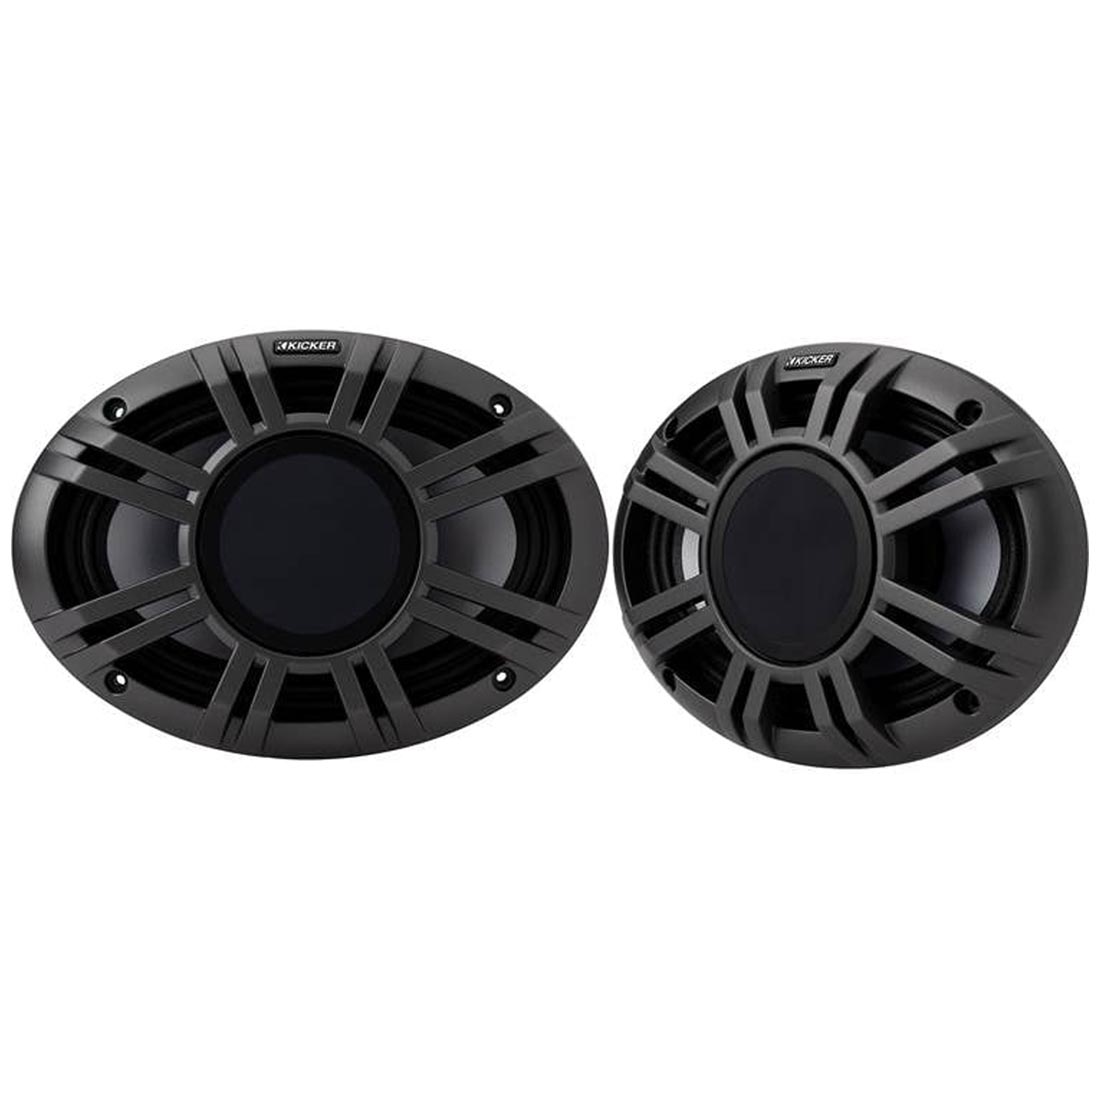 Kicker 48KMXL694 6"x9" Coaxial Marine Speakers with White and Charcoal Grilles